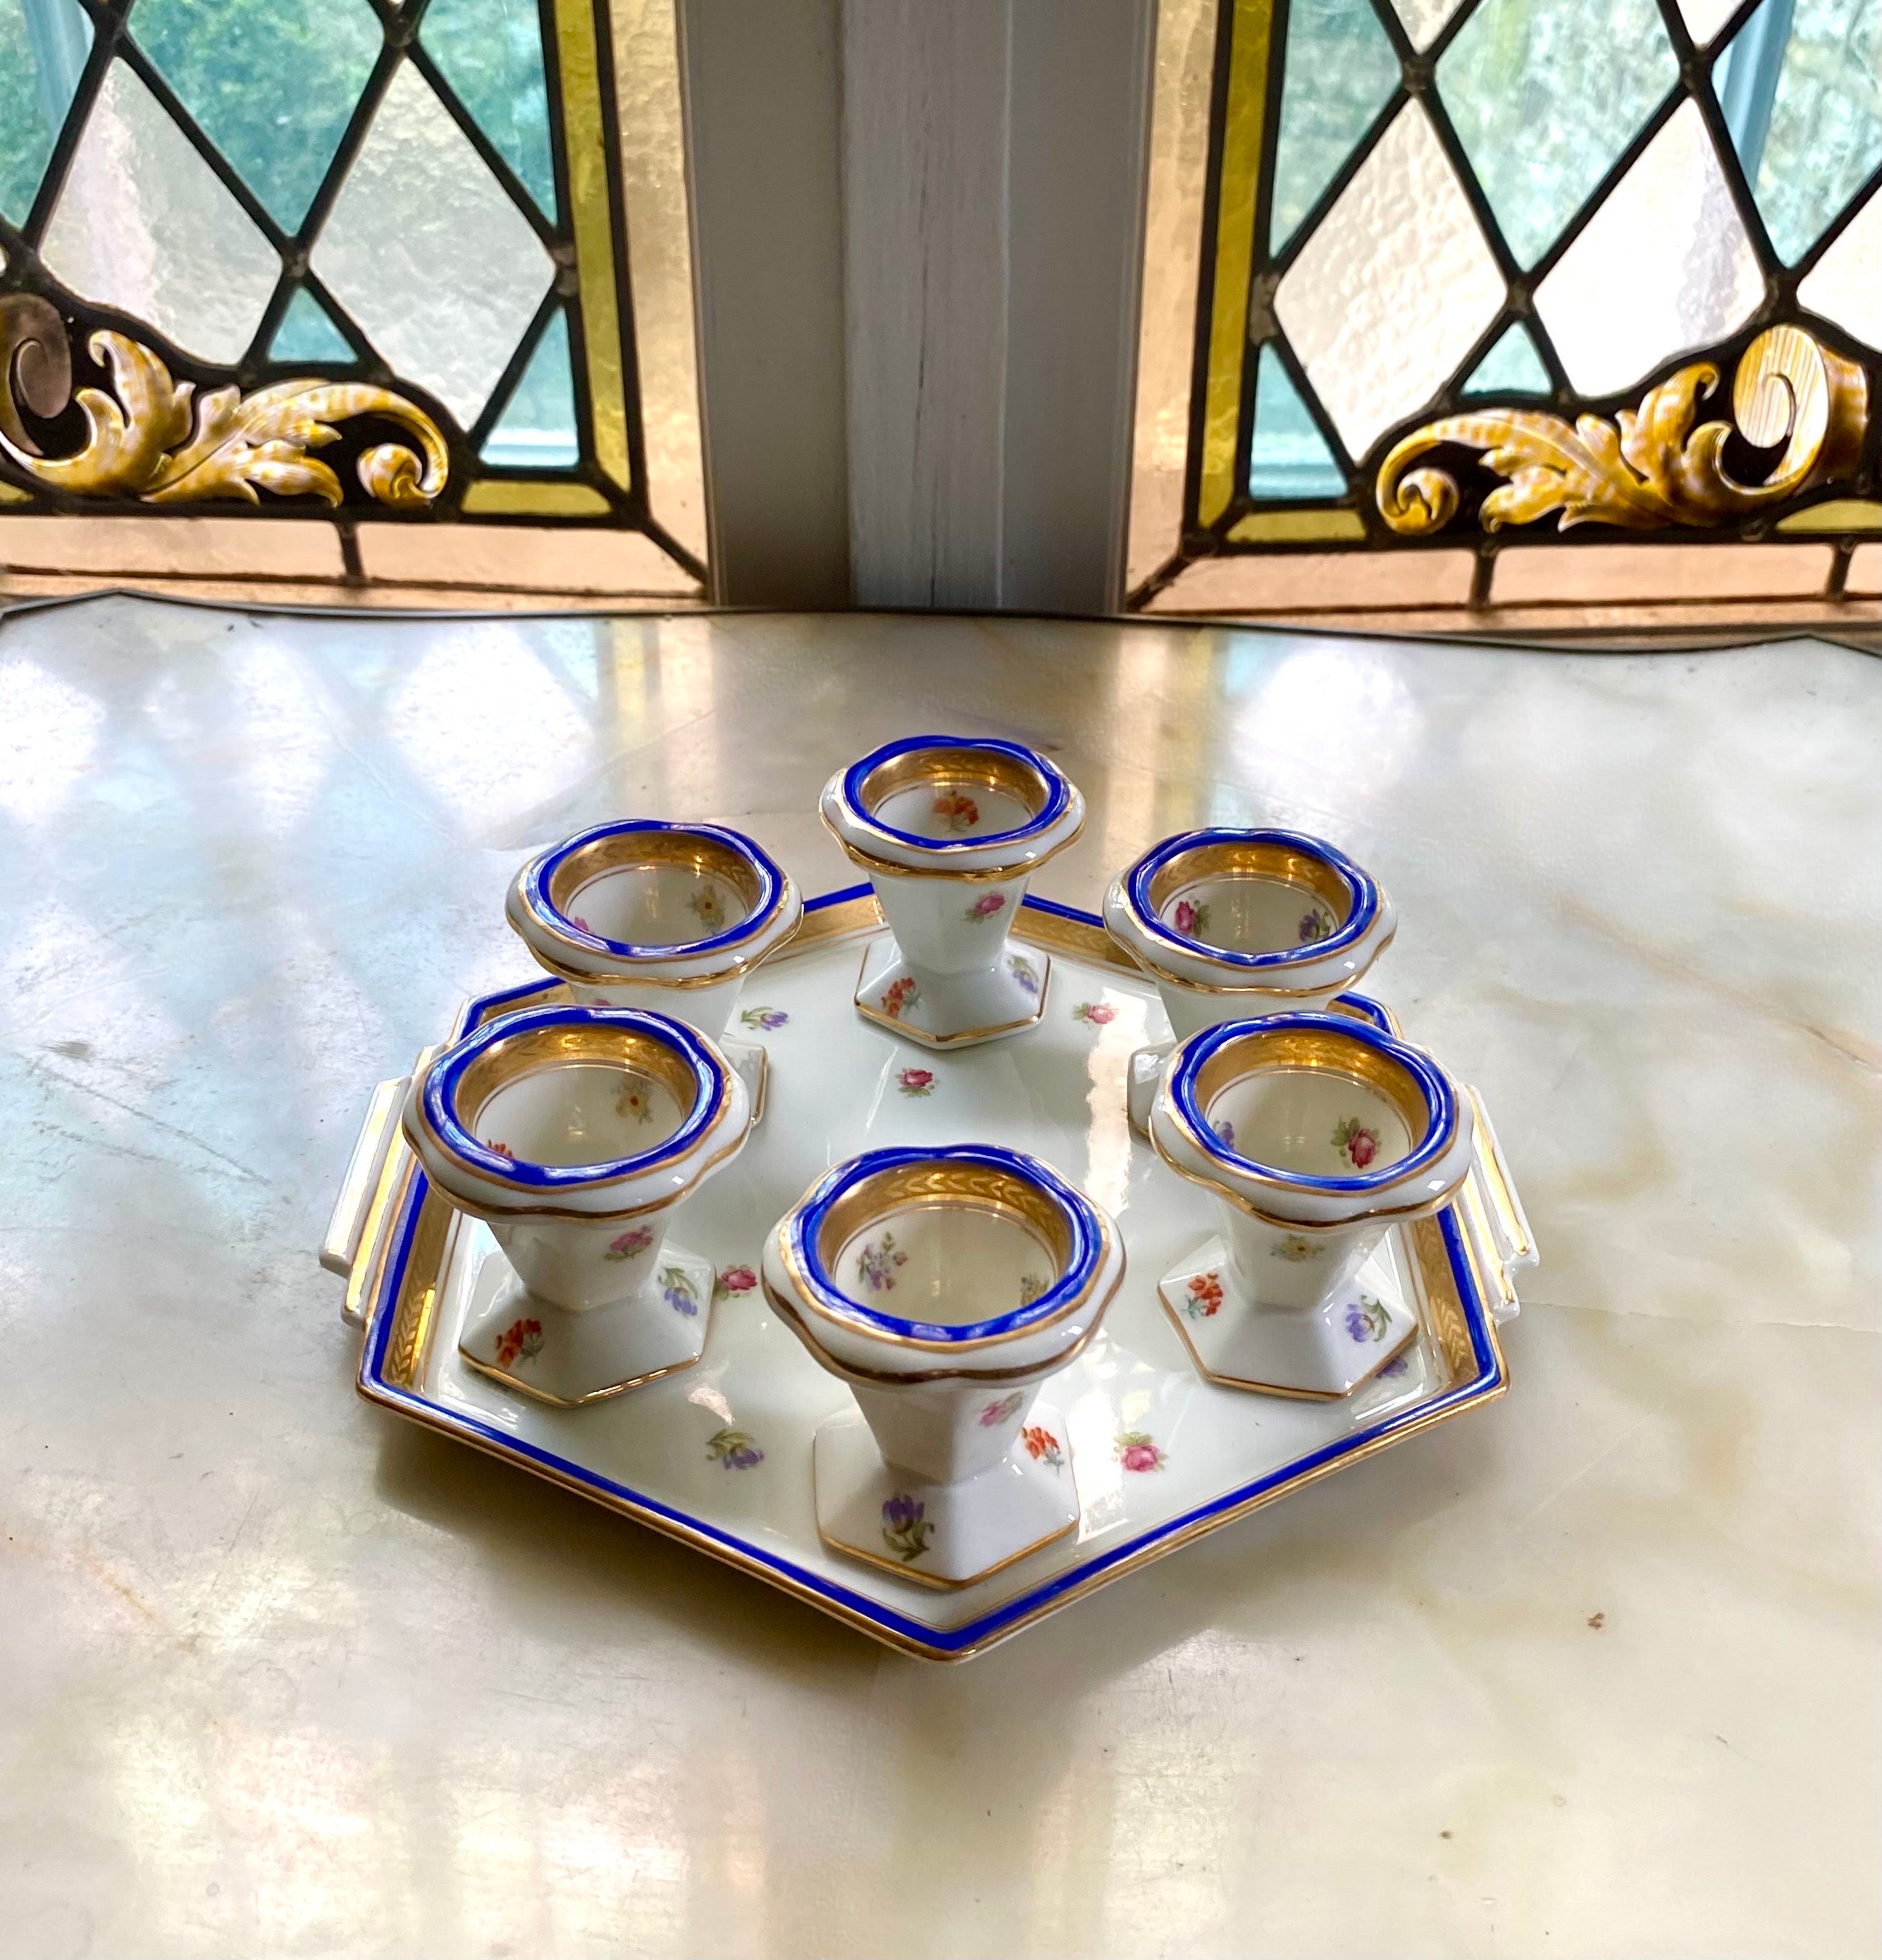 Pretty soft-boiled egg service including 6 egg cups and a matching Limoges porcelain tray.
Decorated with small pink, orange and purple flowers.
Striking colors of French Blue as well as several gold edgings on the outside and inside of the egg